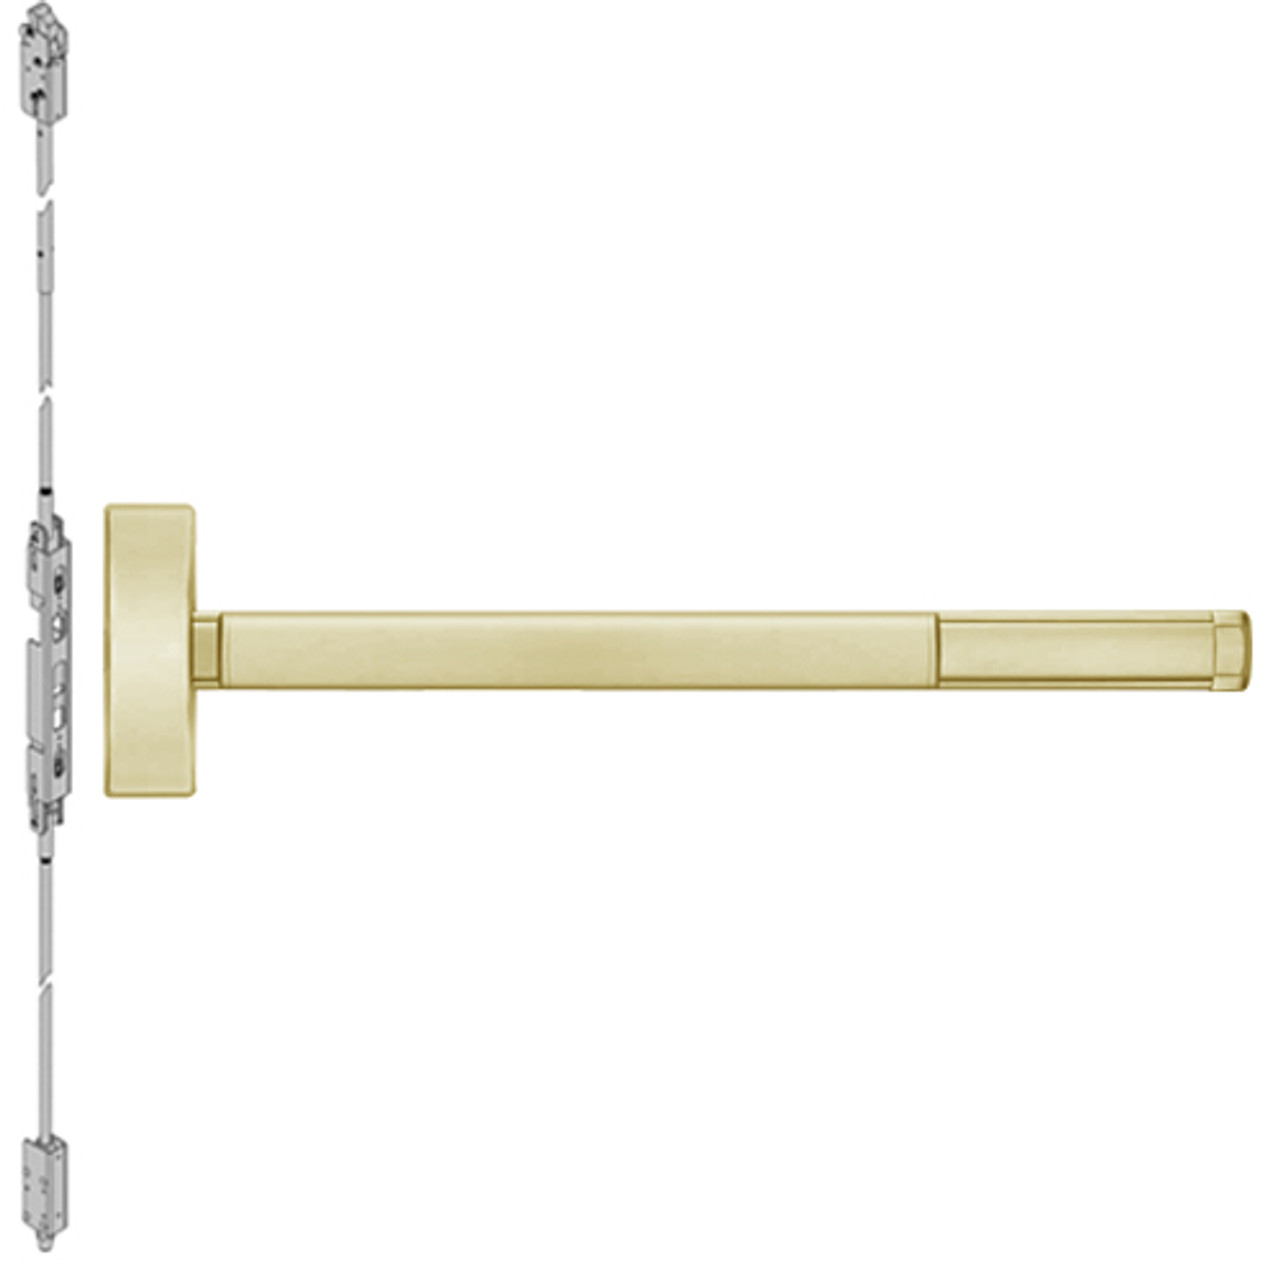 DEFL2802-606-48 PHI 2800 Series Fire Rated Concealed Vertical Rod Exit Device with Delayed Egress Prepped for Dummy Trim in Satin Brass Finish